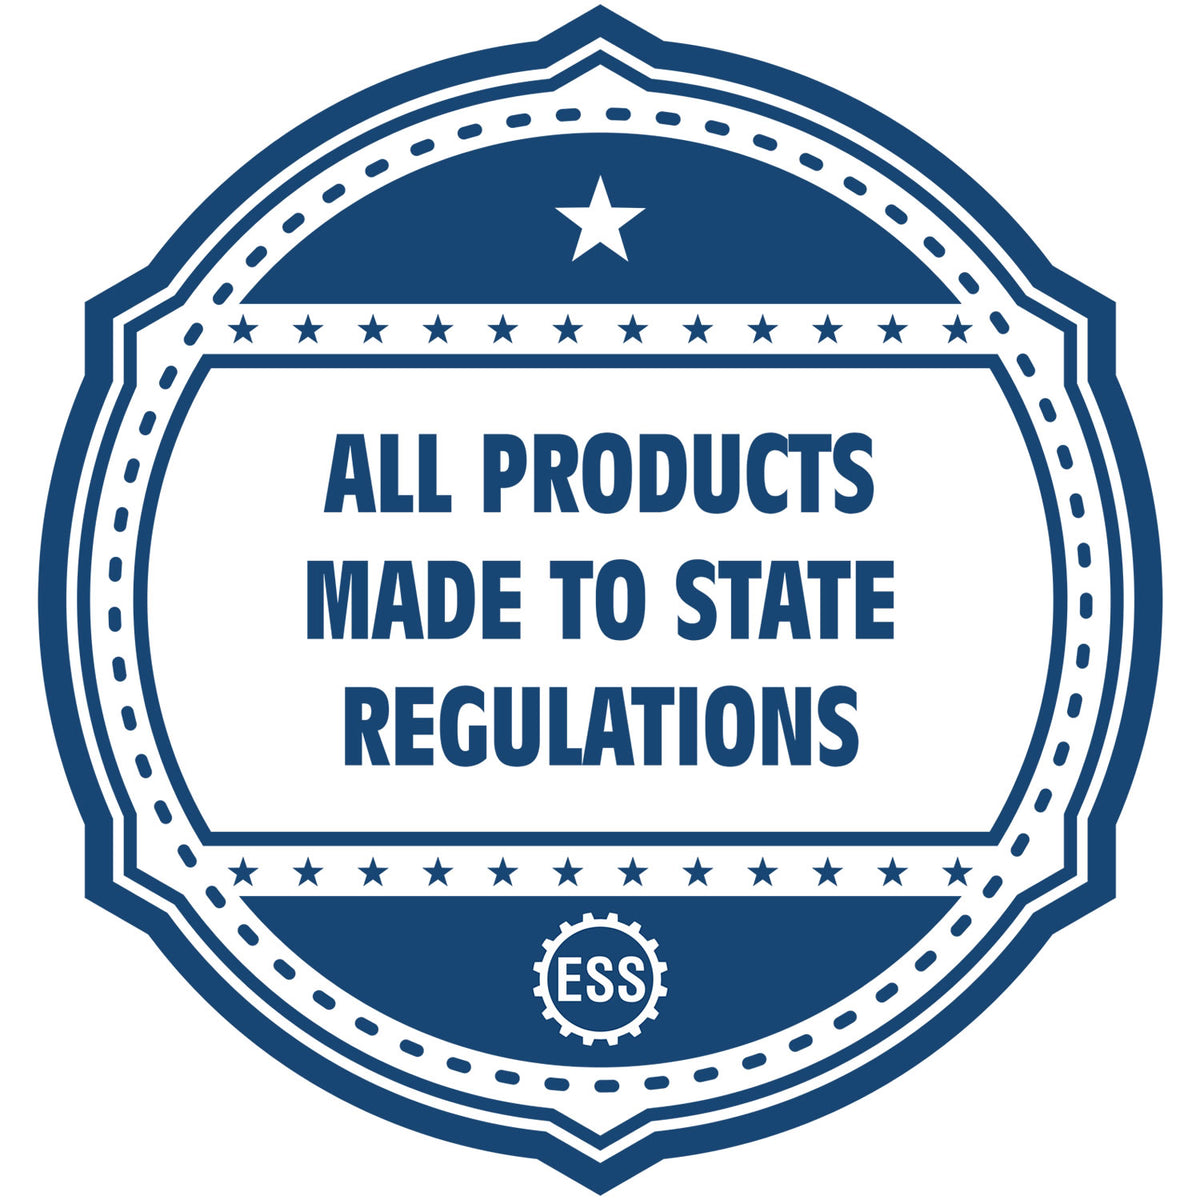 An icon or badge element for the Kansas Landscape Architectural Seal Stamp showing that this product is made in compliance with state regulations.